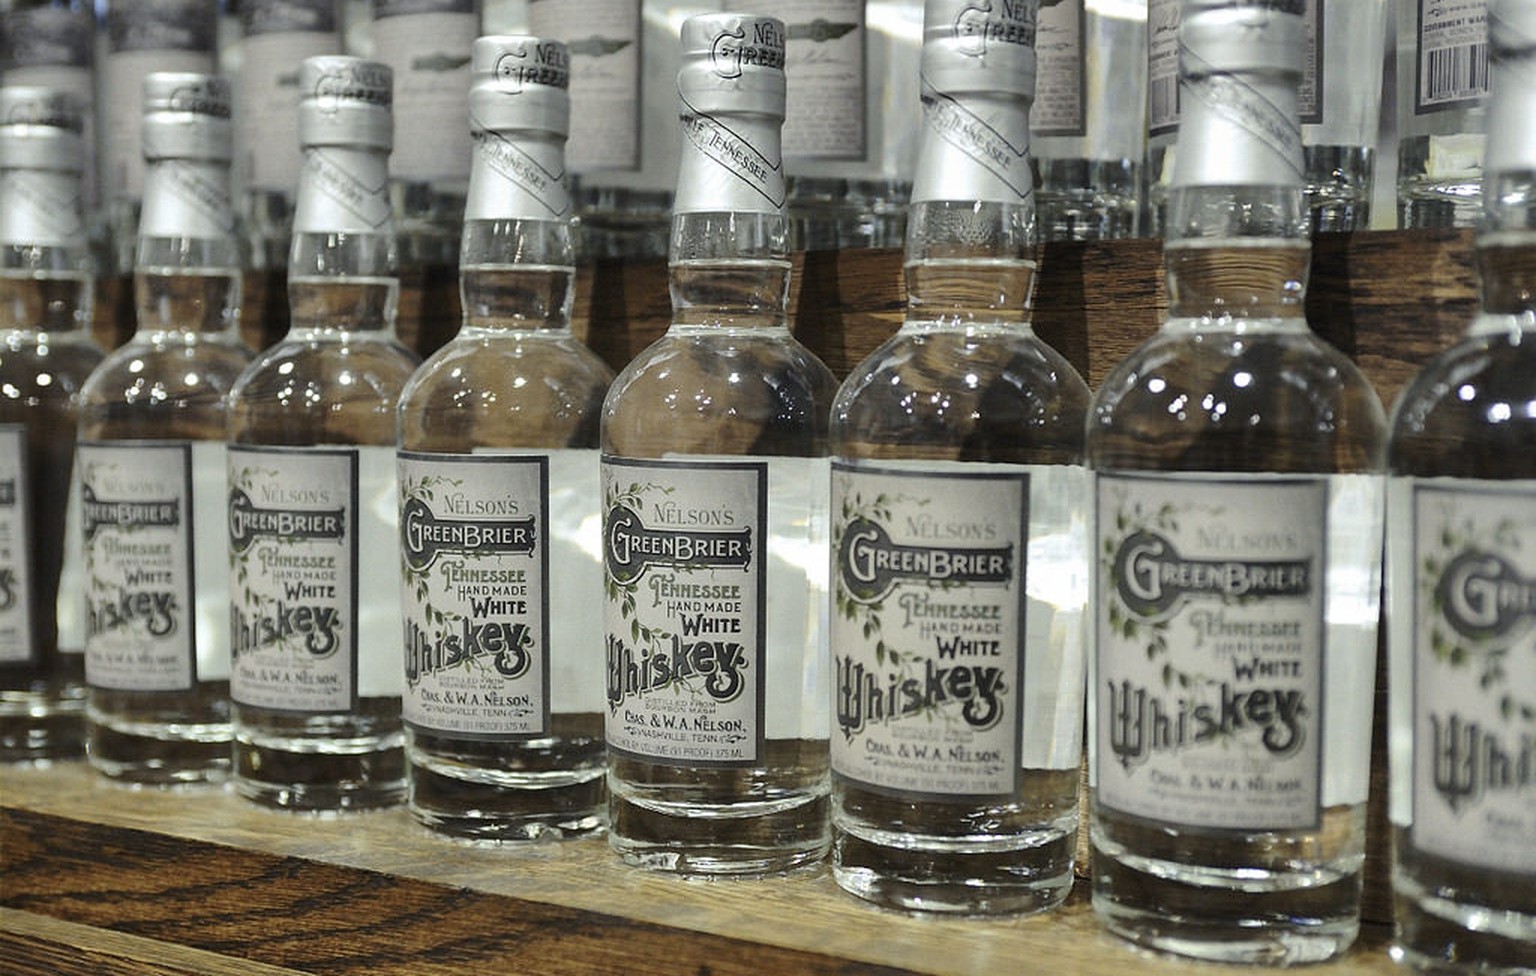 nelson&#039;s greenbrier white whiskey http://www.greenbrierdistillery.com/newsblog/2015/10/8/gold-medal-win-at-washington-cup-spirits-competition